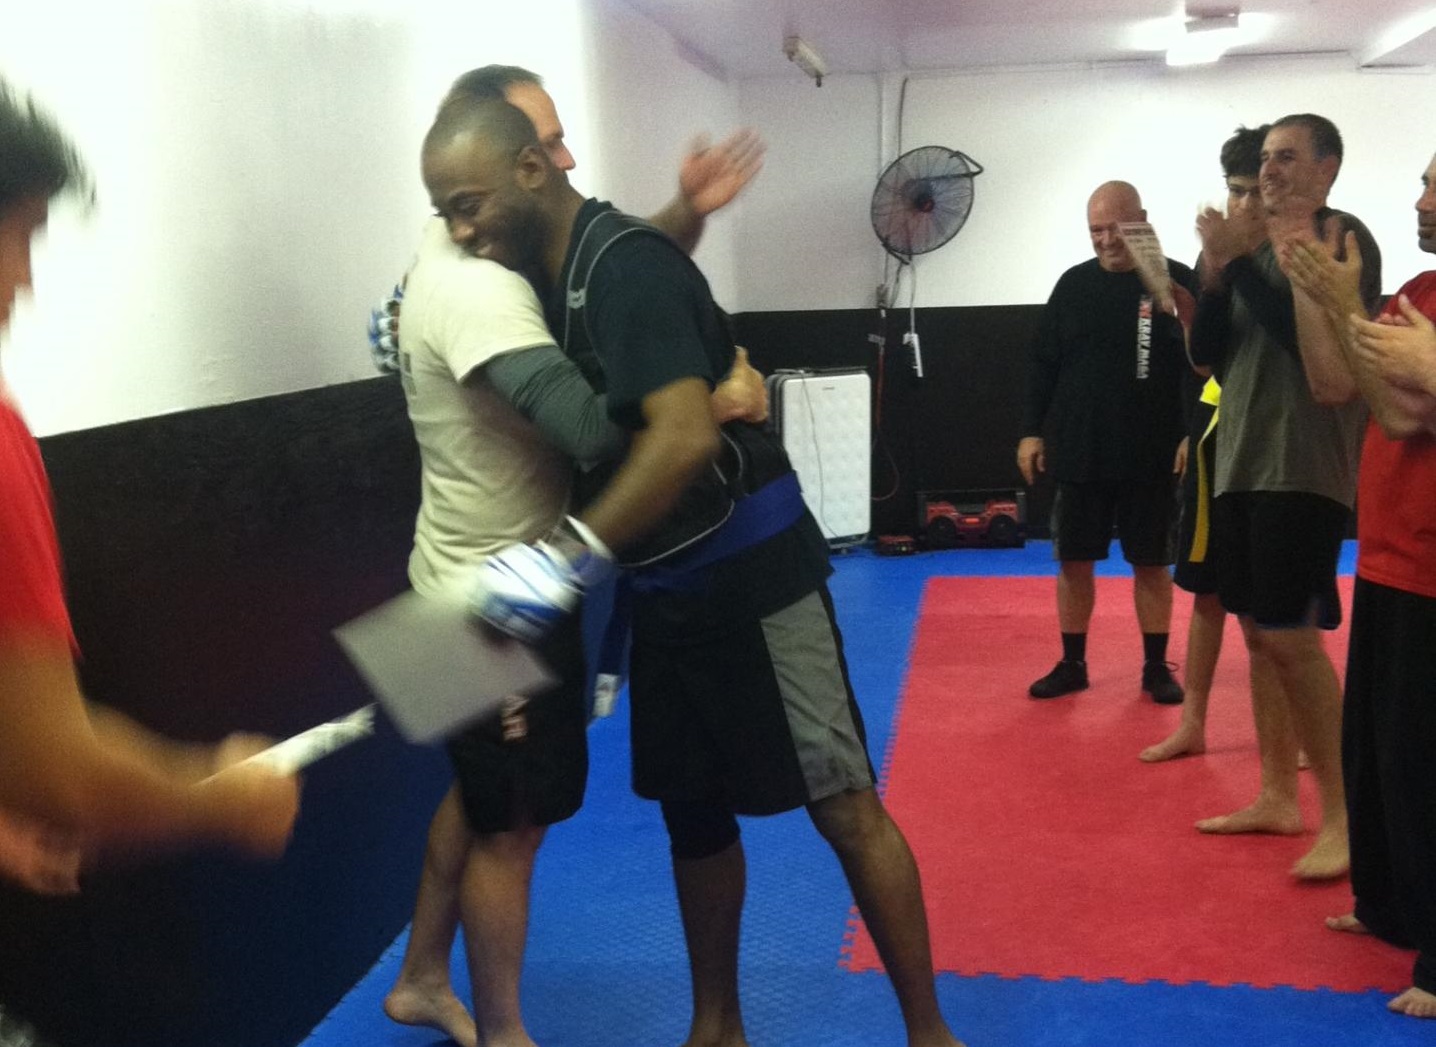 Receiving my Blue Belt in Krav Maga from Instructor Chris Crouch in Dec. 2014